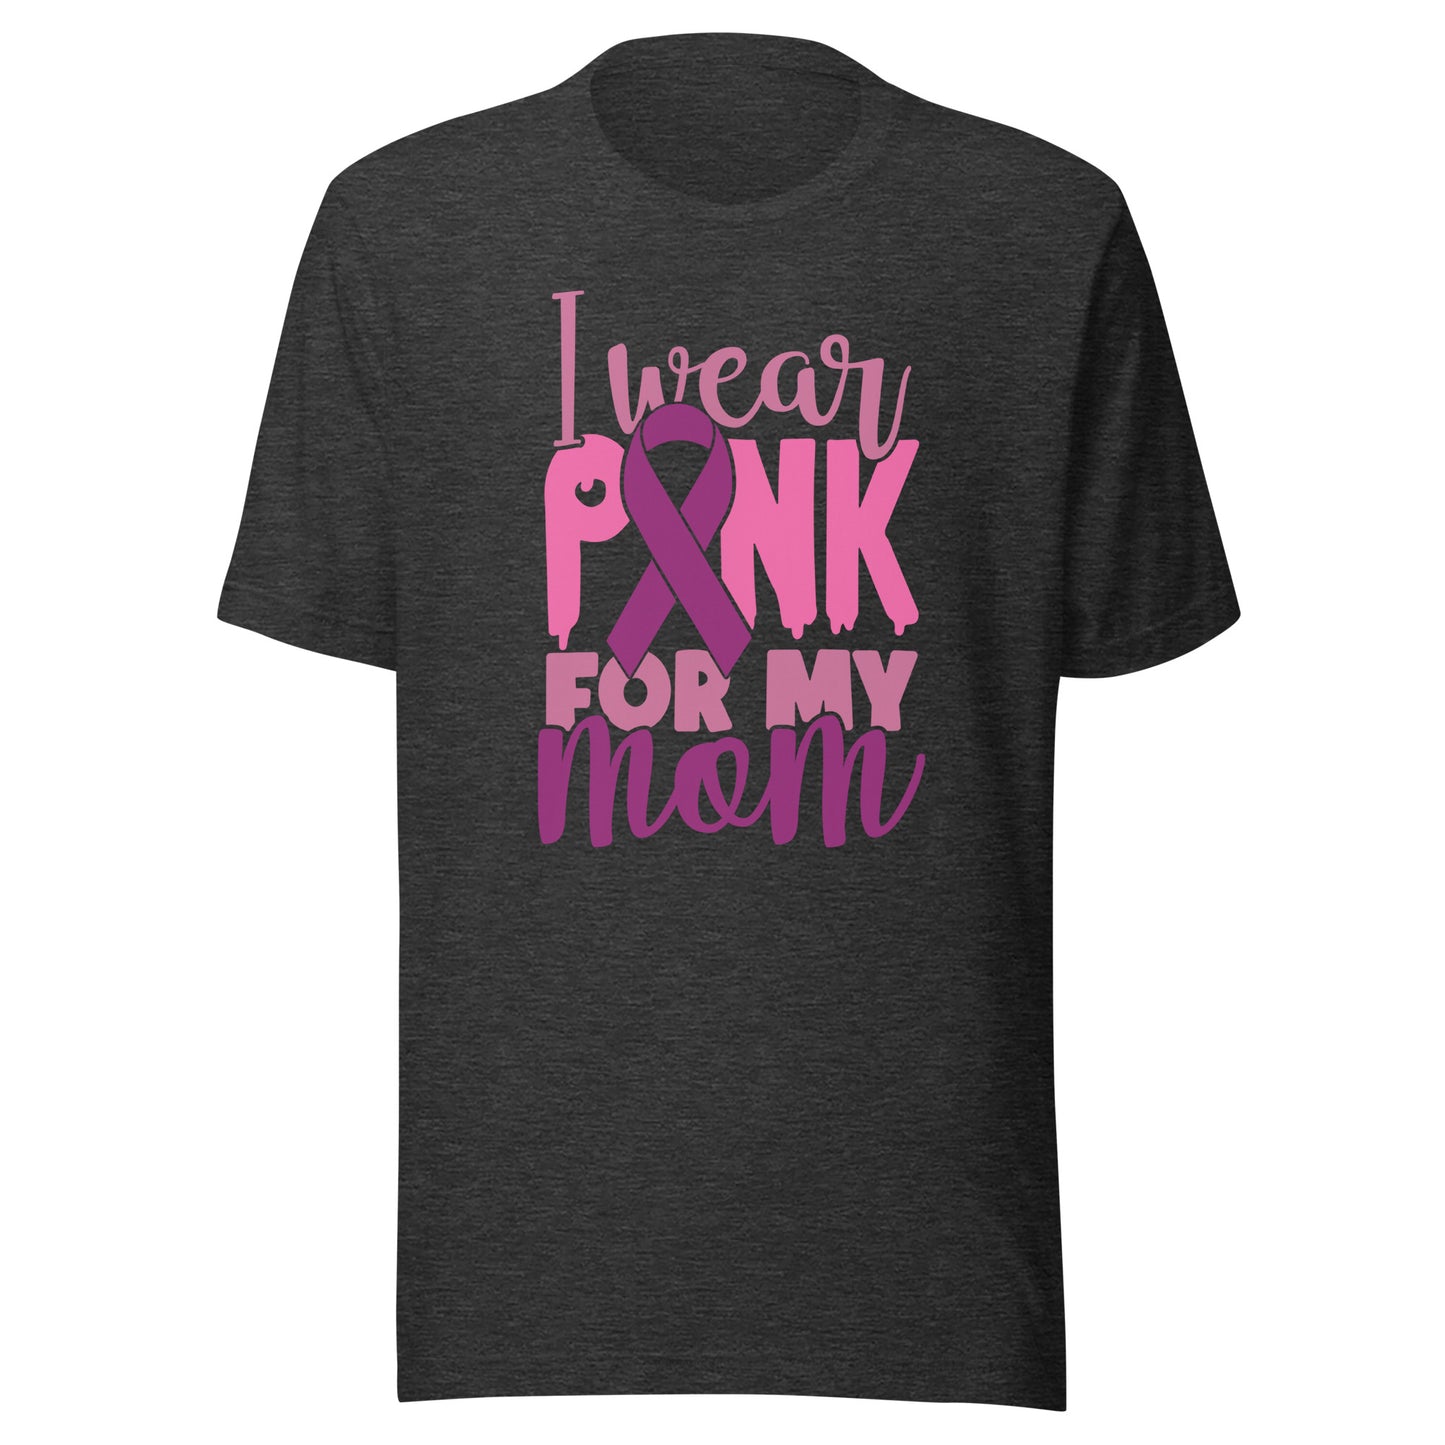 I Wear Pink For My Mom - Breast Cancer Awareness Pink Cancer Ribbon Support Unisex T-shirt